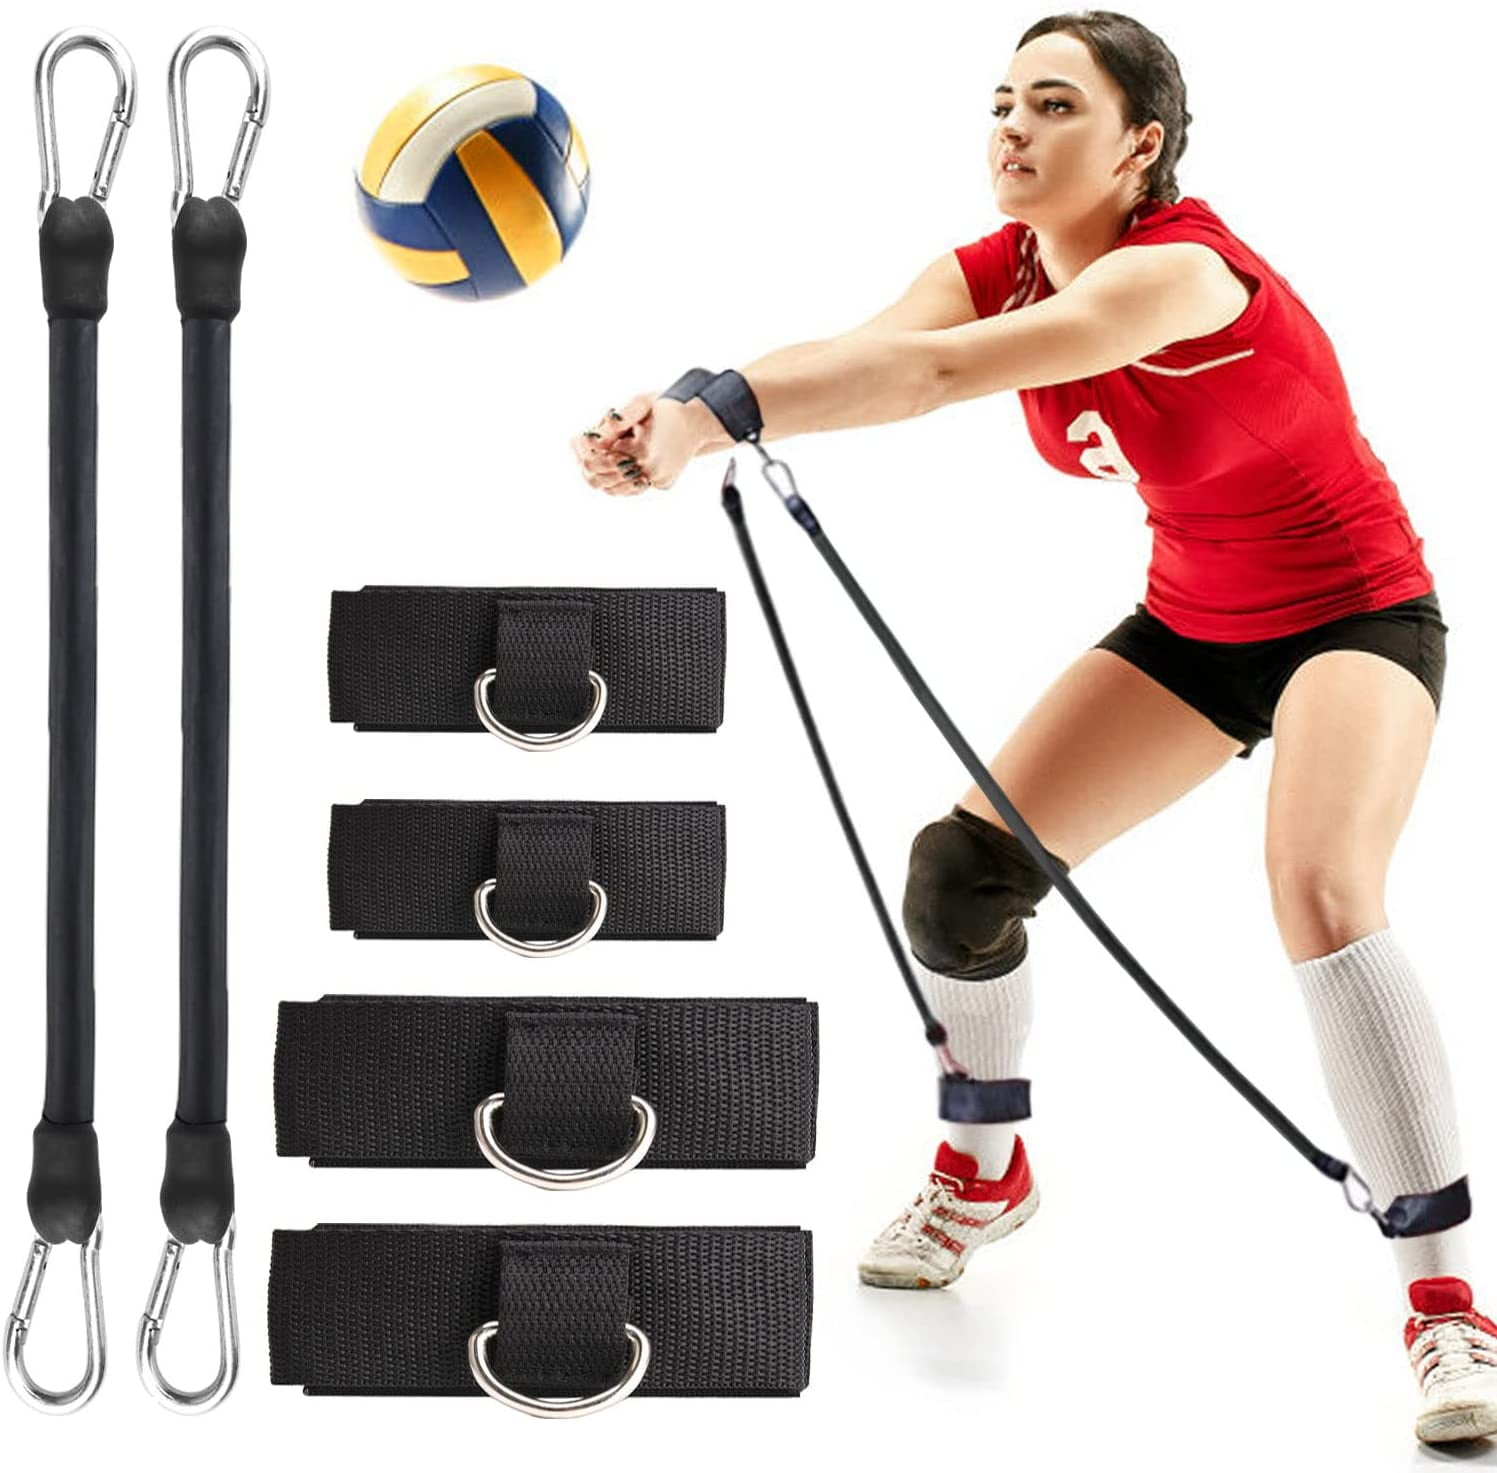 Volleyball Training Equipment Aid for Practicing Serving Arm Swing Passing Agility Training Elastic Volleyball Resistance Belt Set Adjustable Cord and Waist Length Fits Any Volleyball 